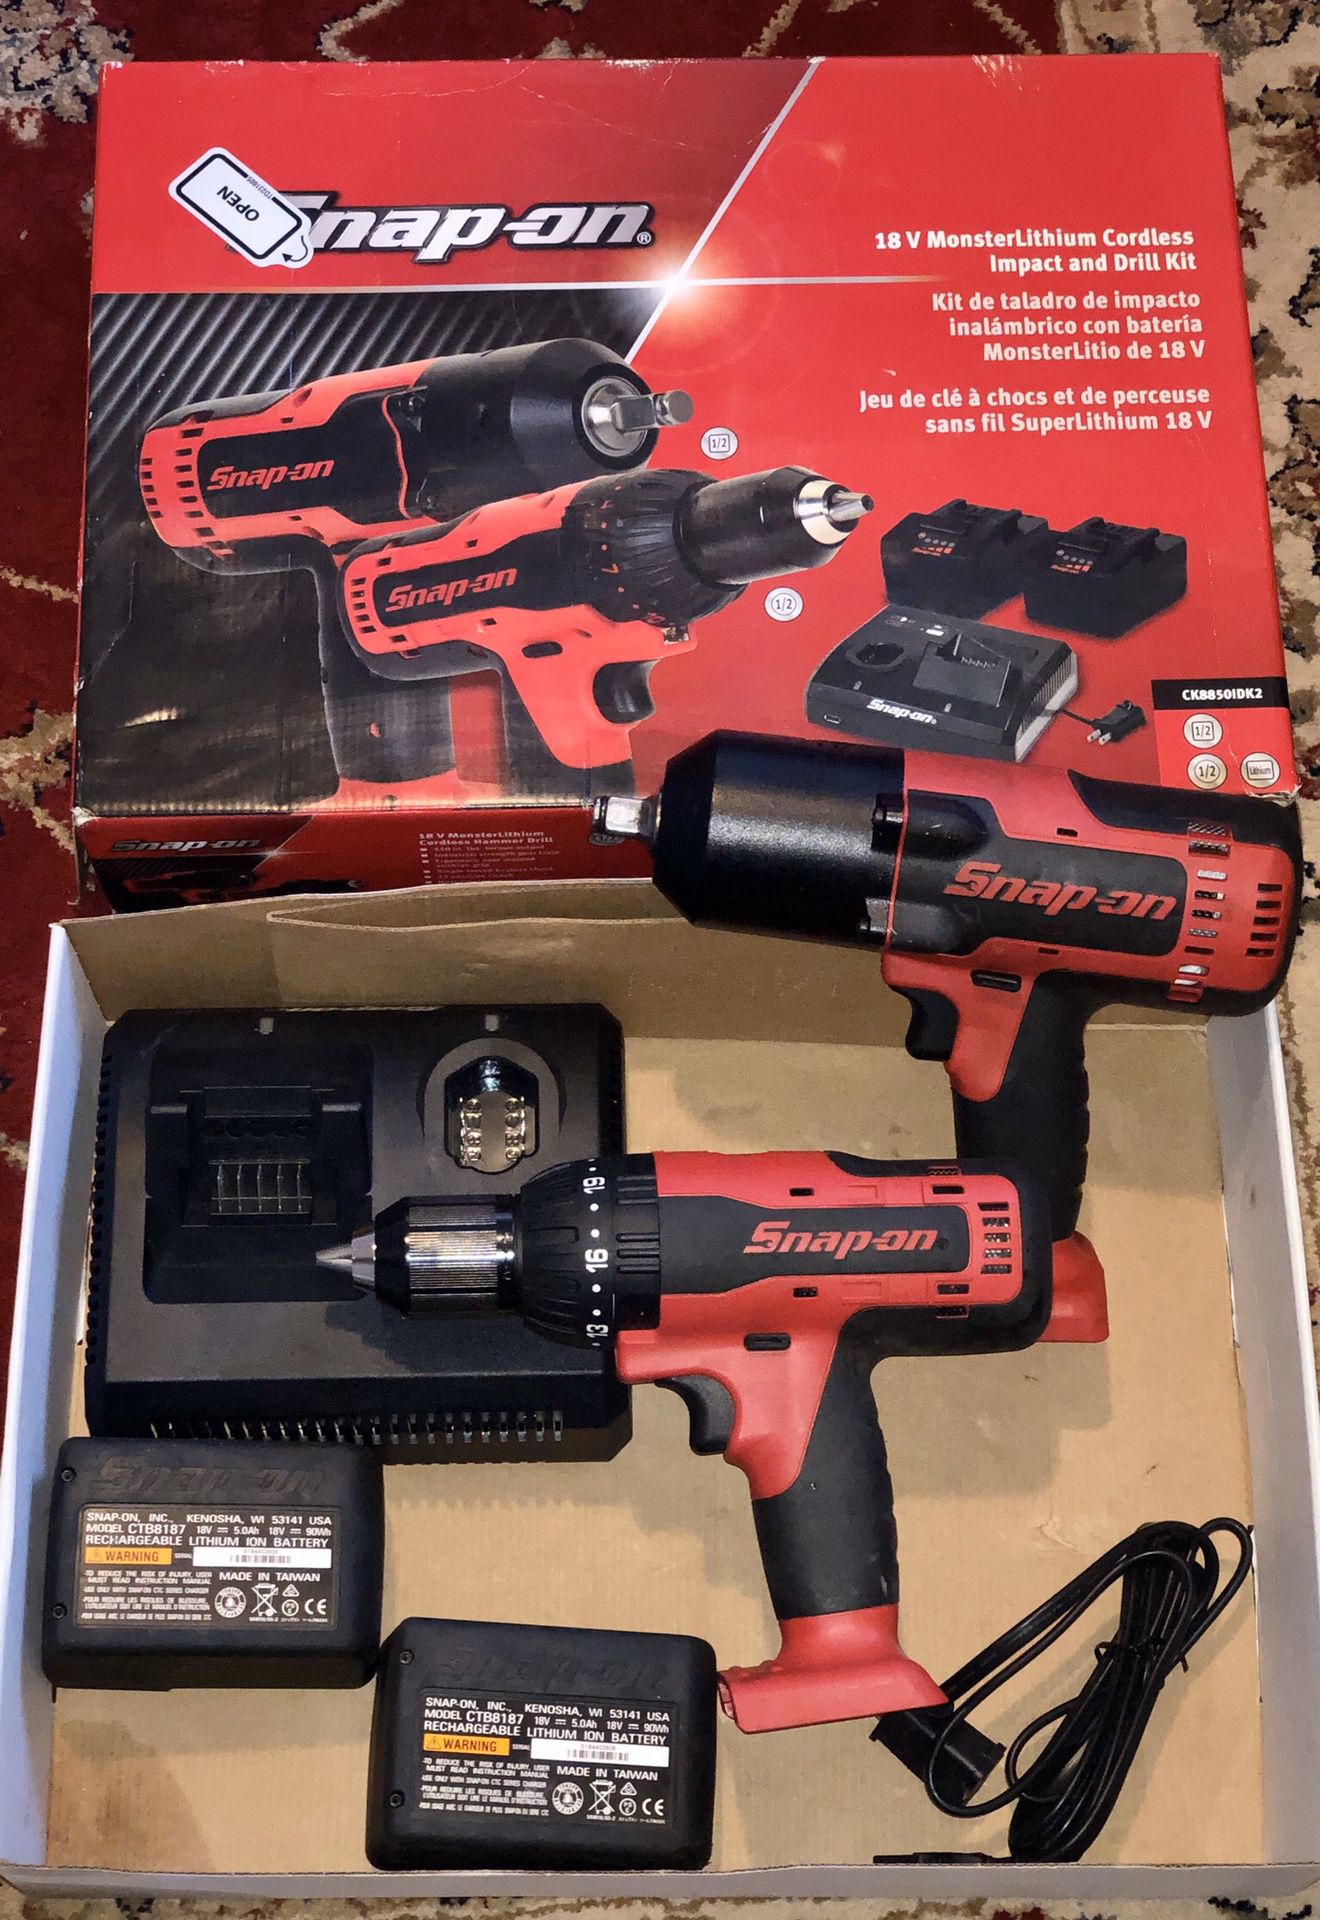 Snap-on 18V monster lithium cordless impact and drill kit